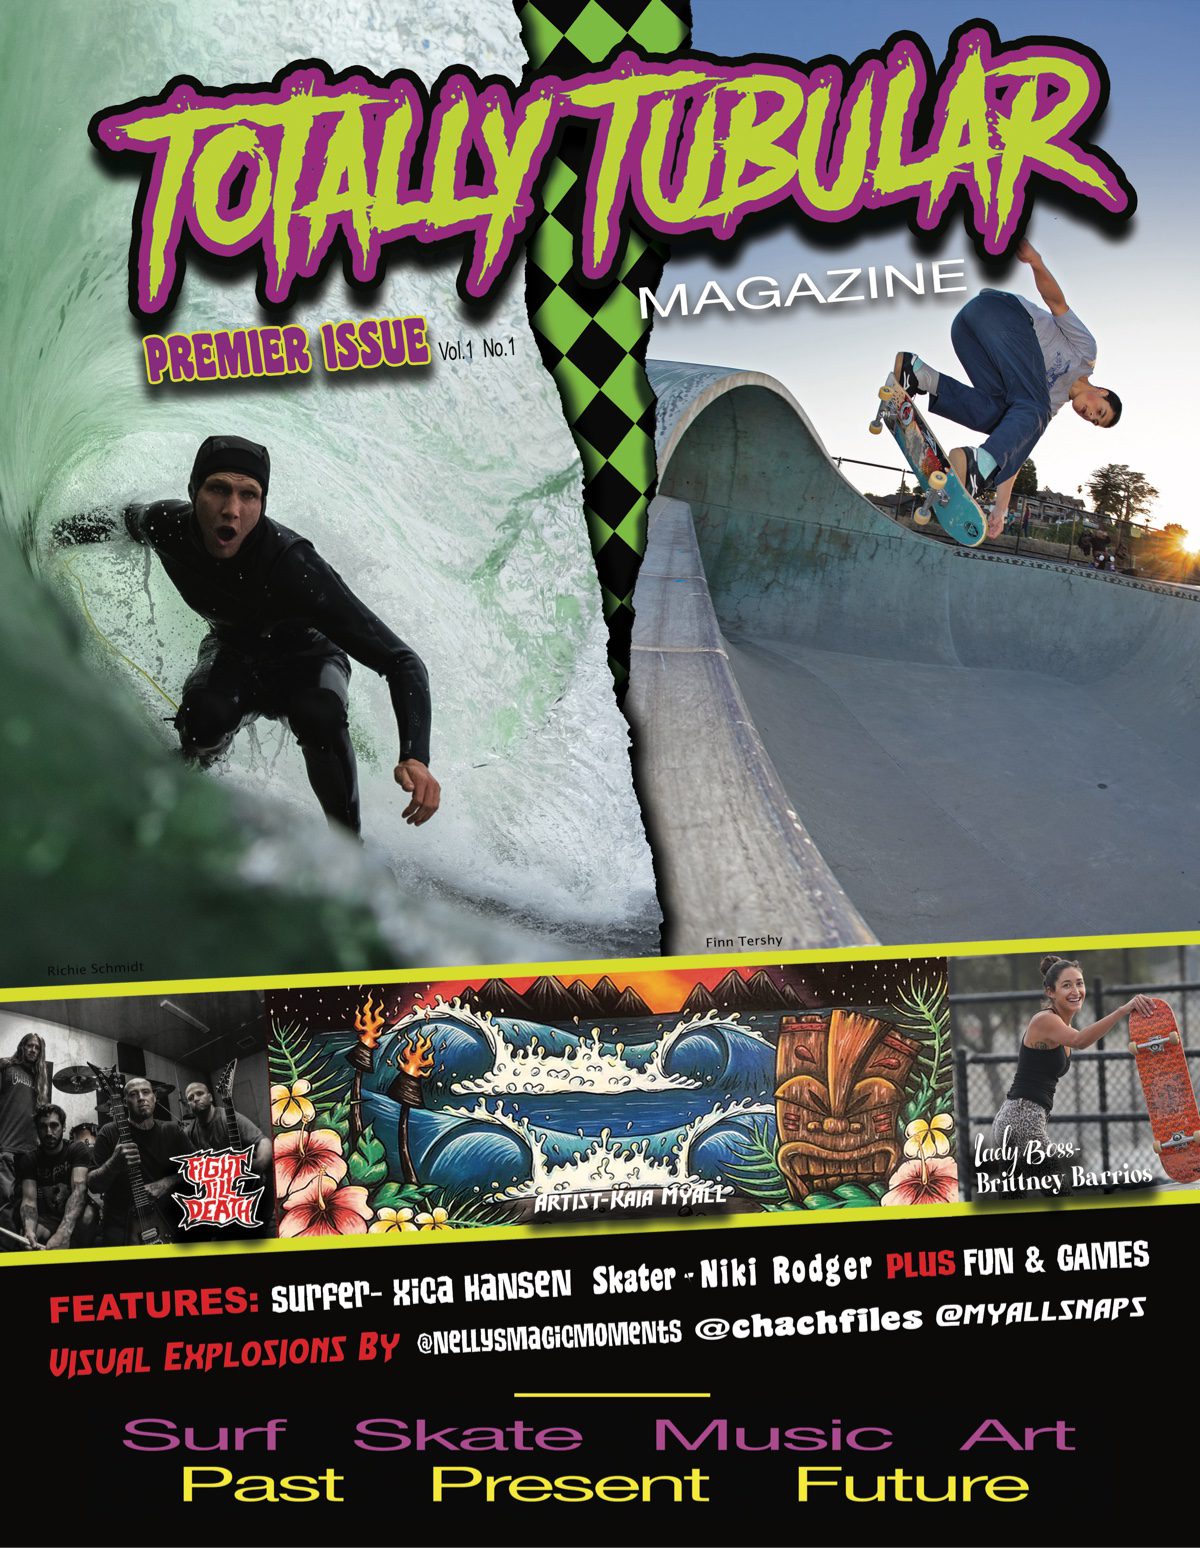 Totally Tubular Magazine First Issue Cover